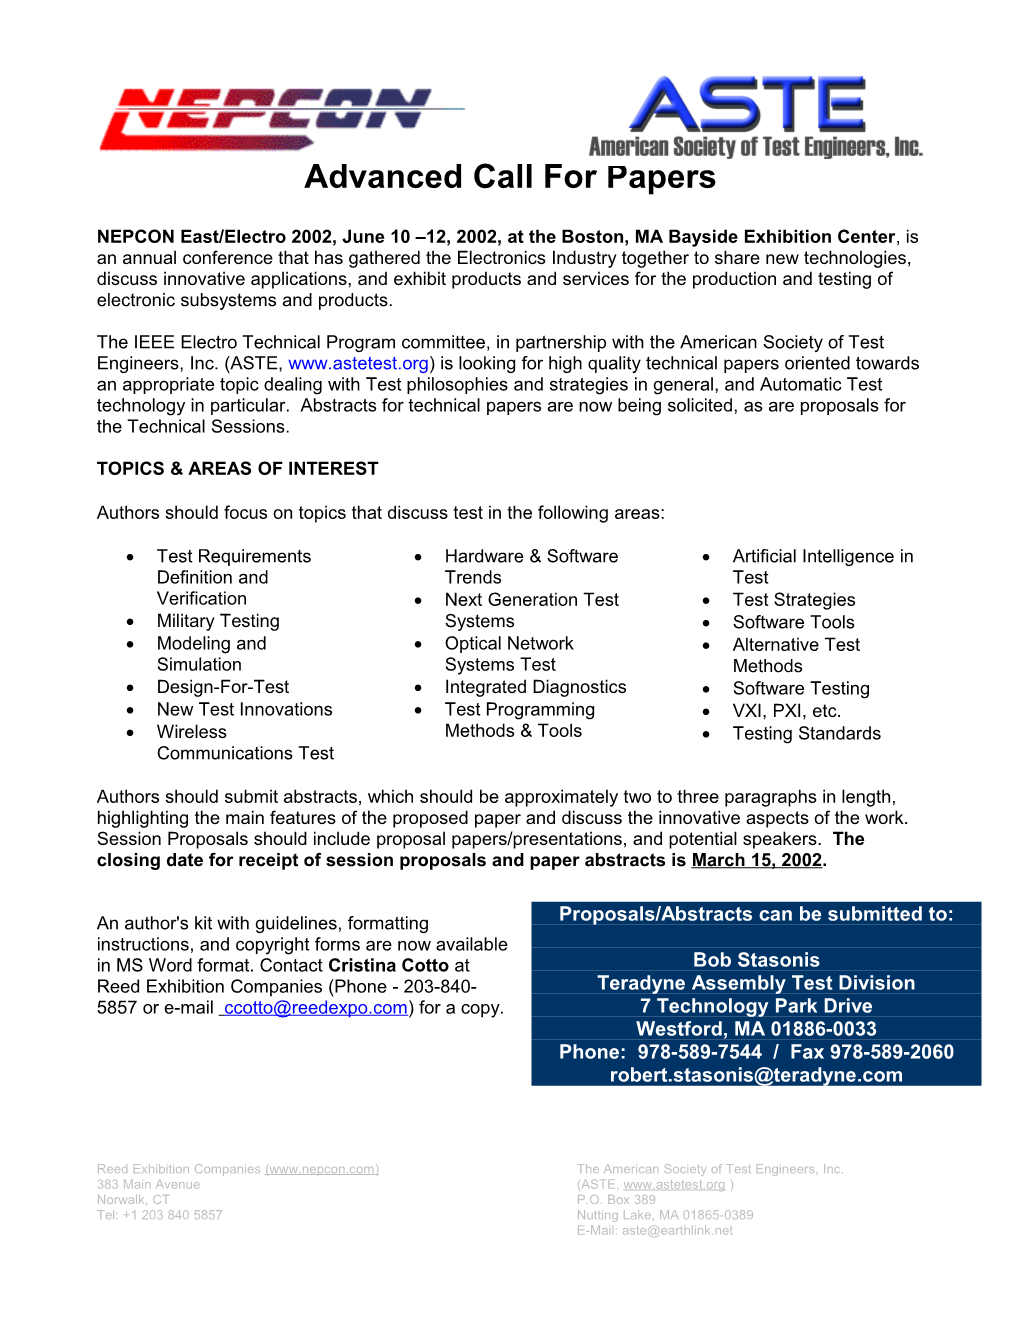 Advanced Call for Papers